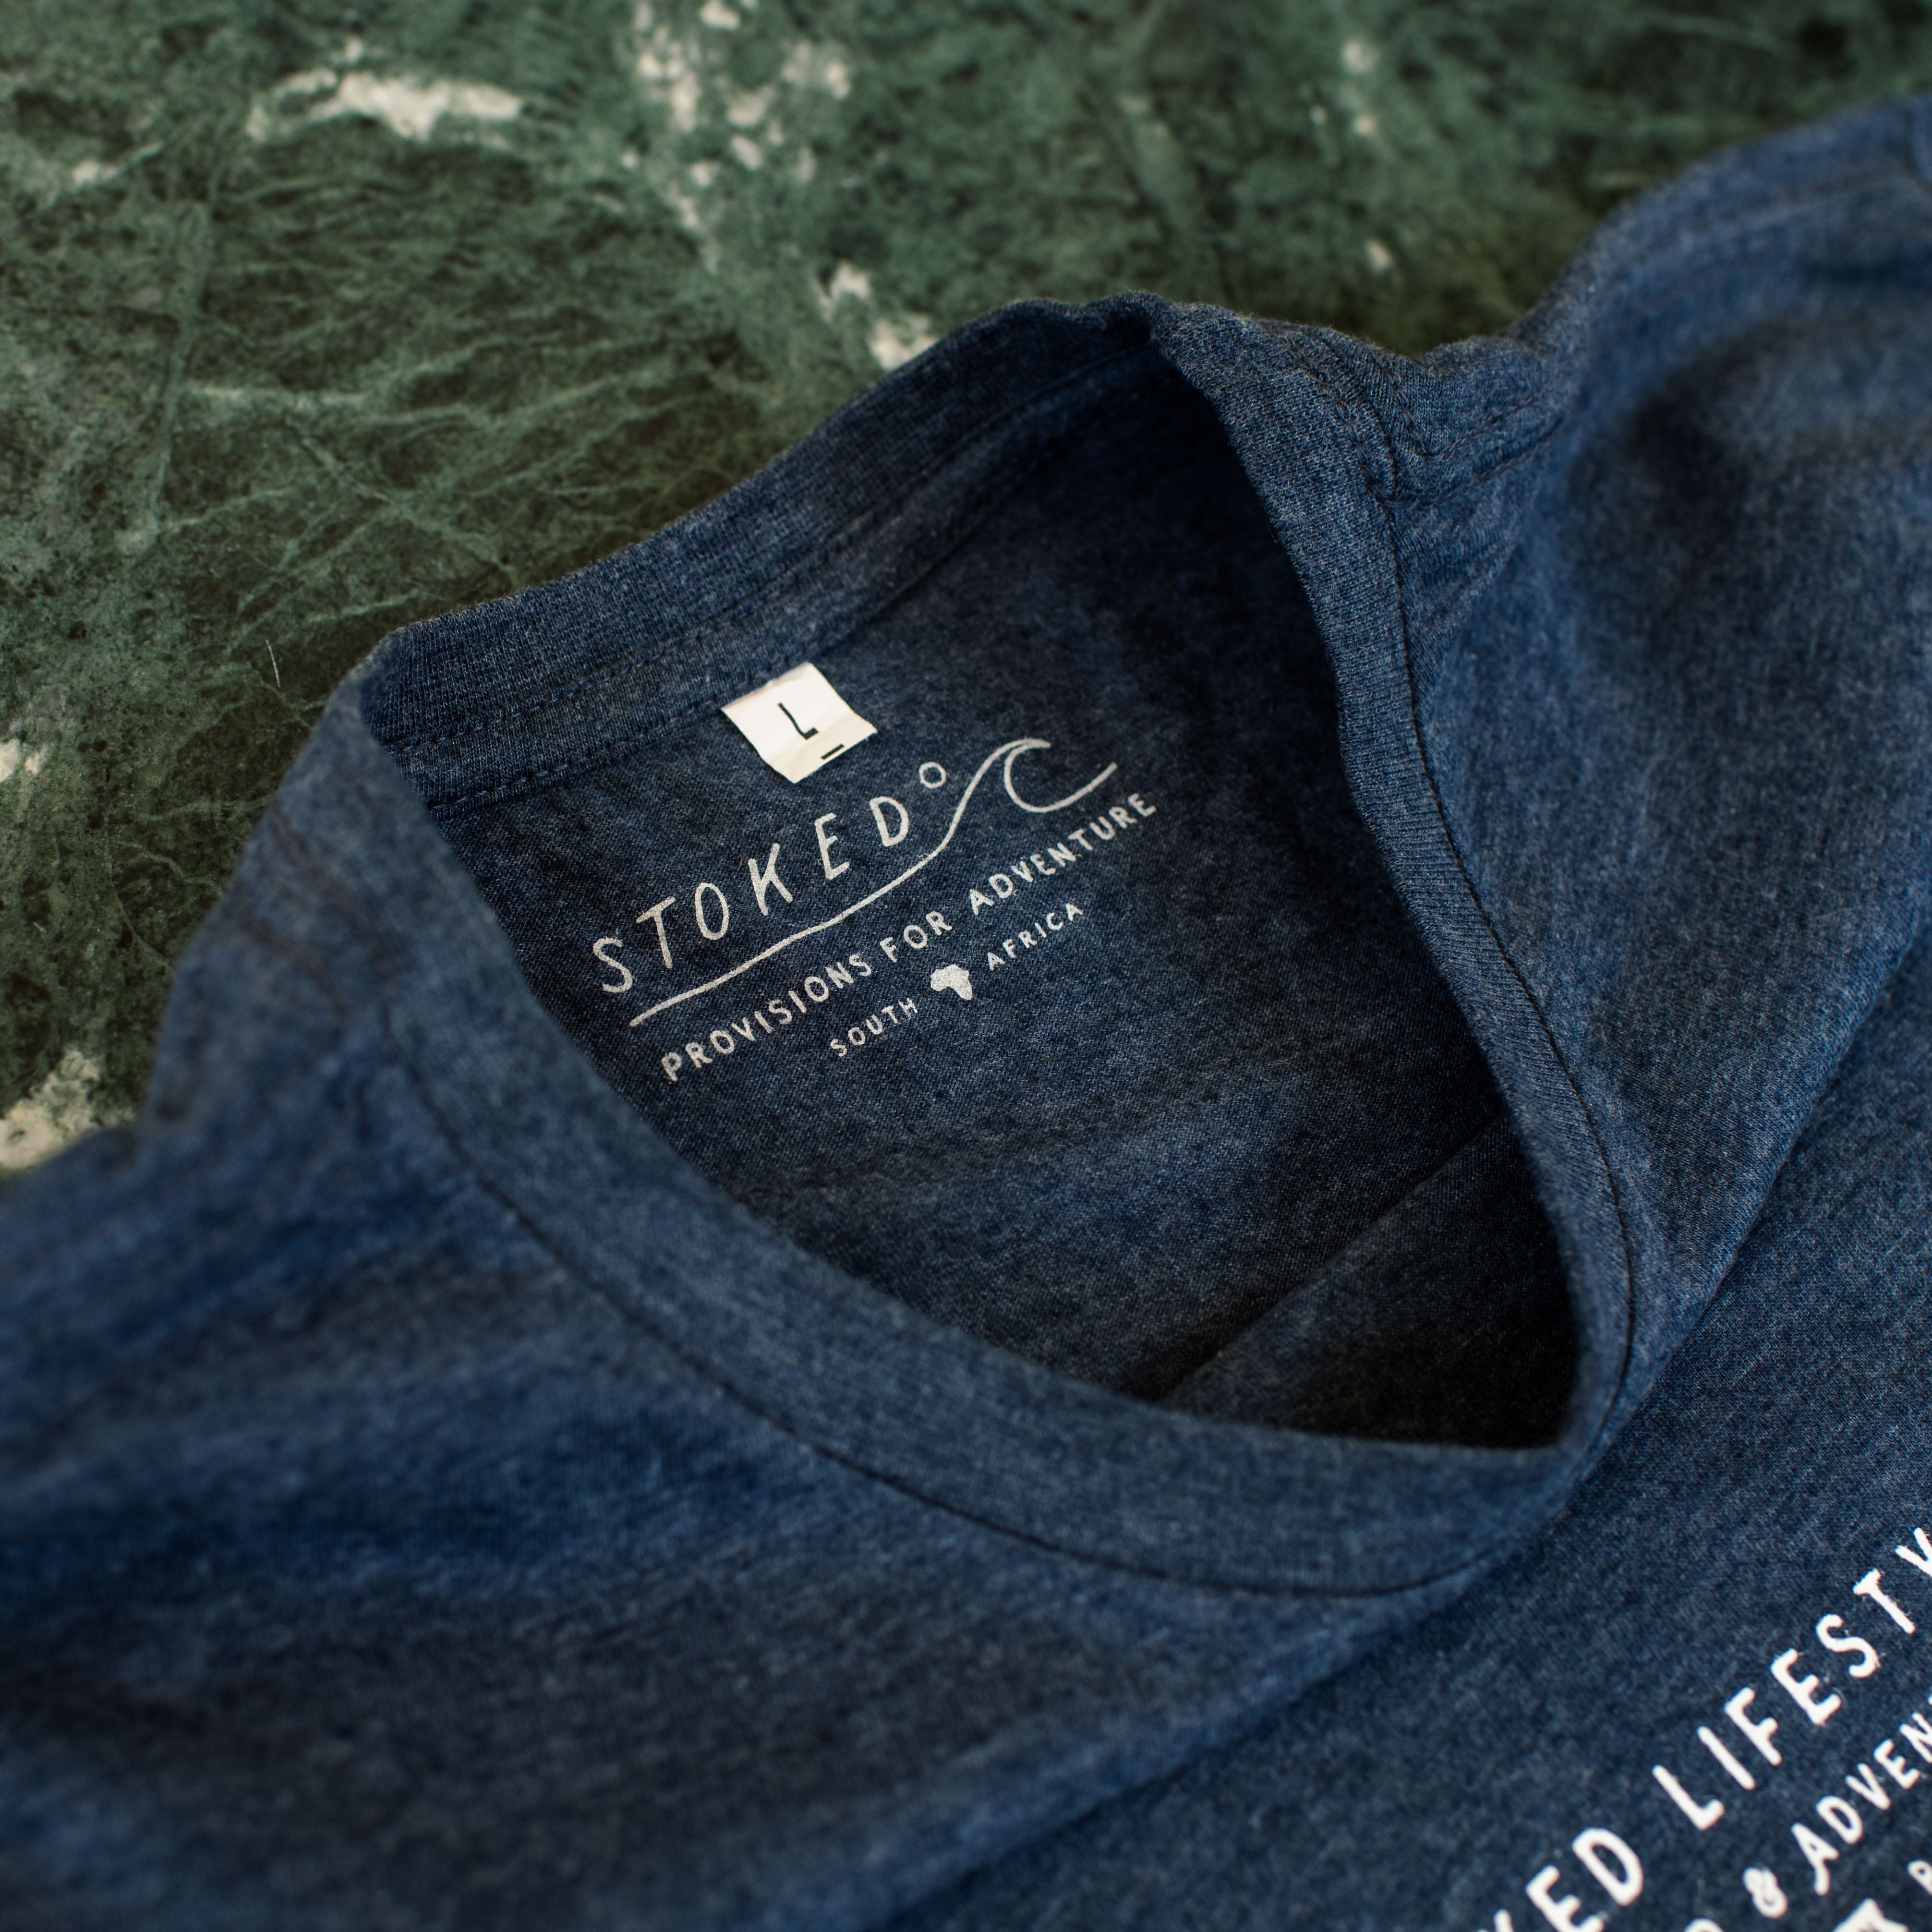 Dusk Navy Minimal Lifestyle T-Shirt - Stokedthebrand. Lifestyle products for outdoor adventures. Made in South Africa